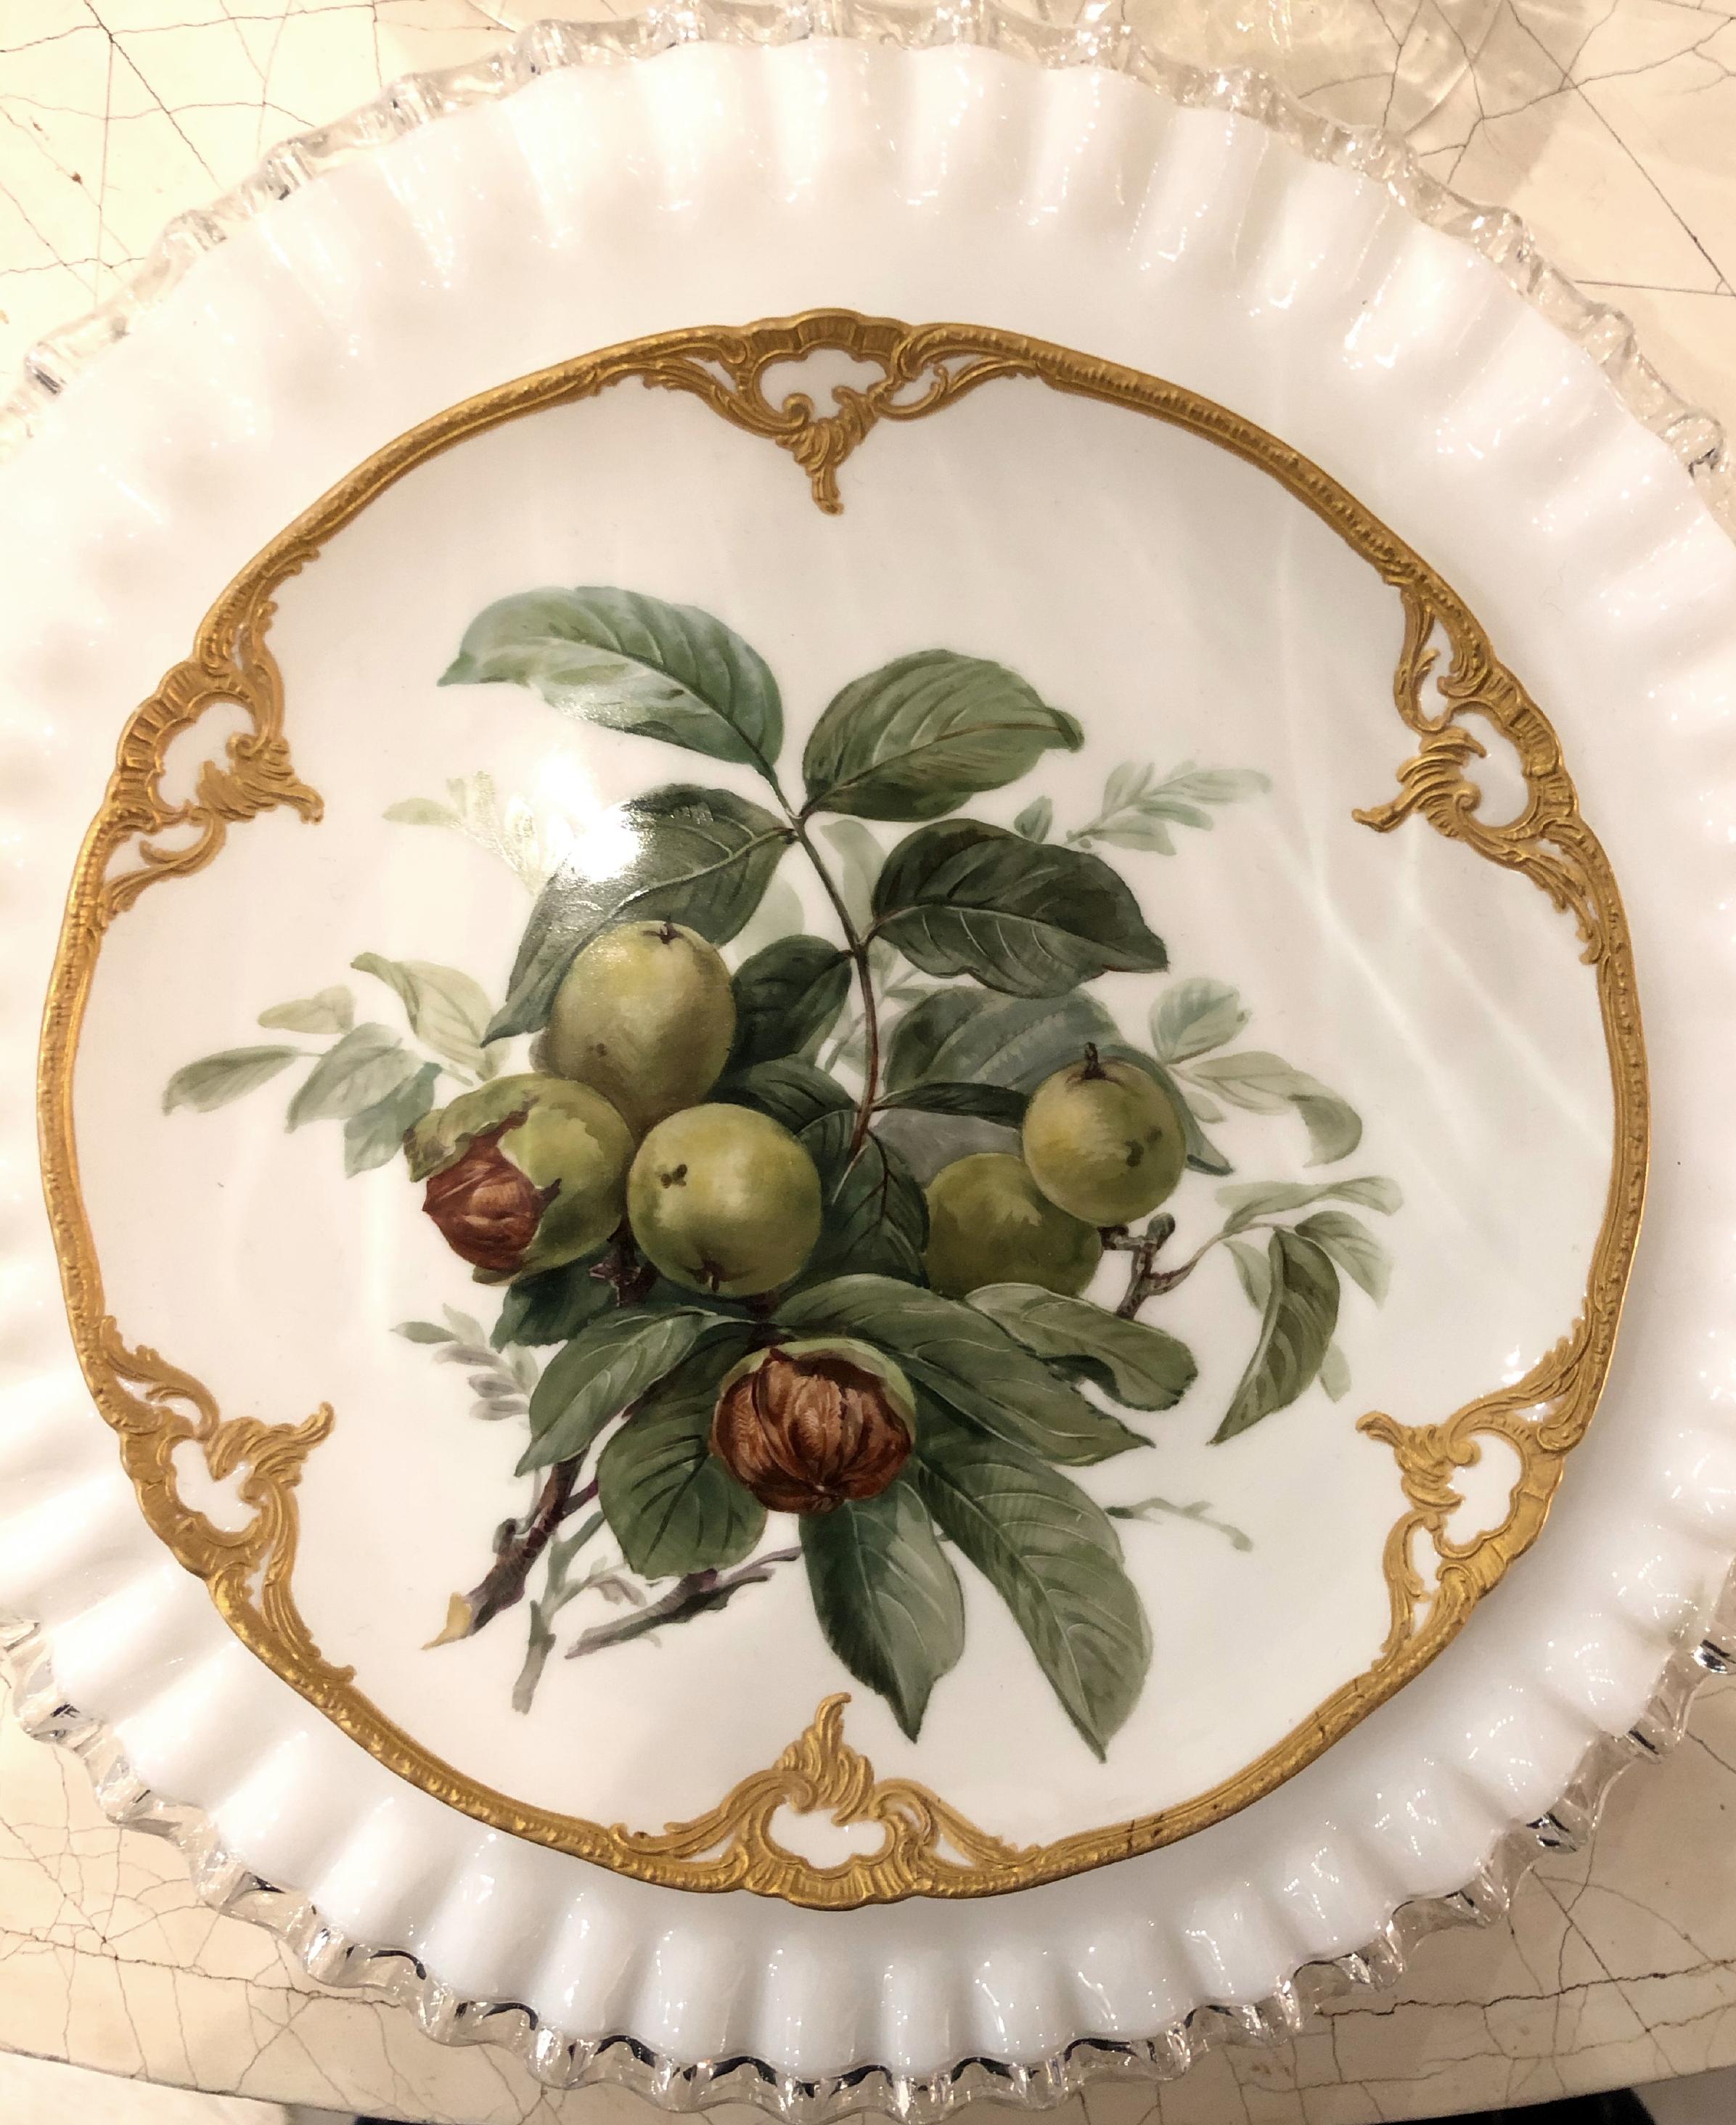 Set of eight beautiful hand-painted turn off the century porcelain plates depicting fruit with elaborate 14-karat gold detailing. The back of each is stamped 